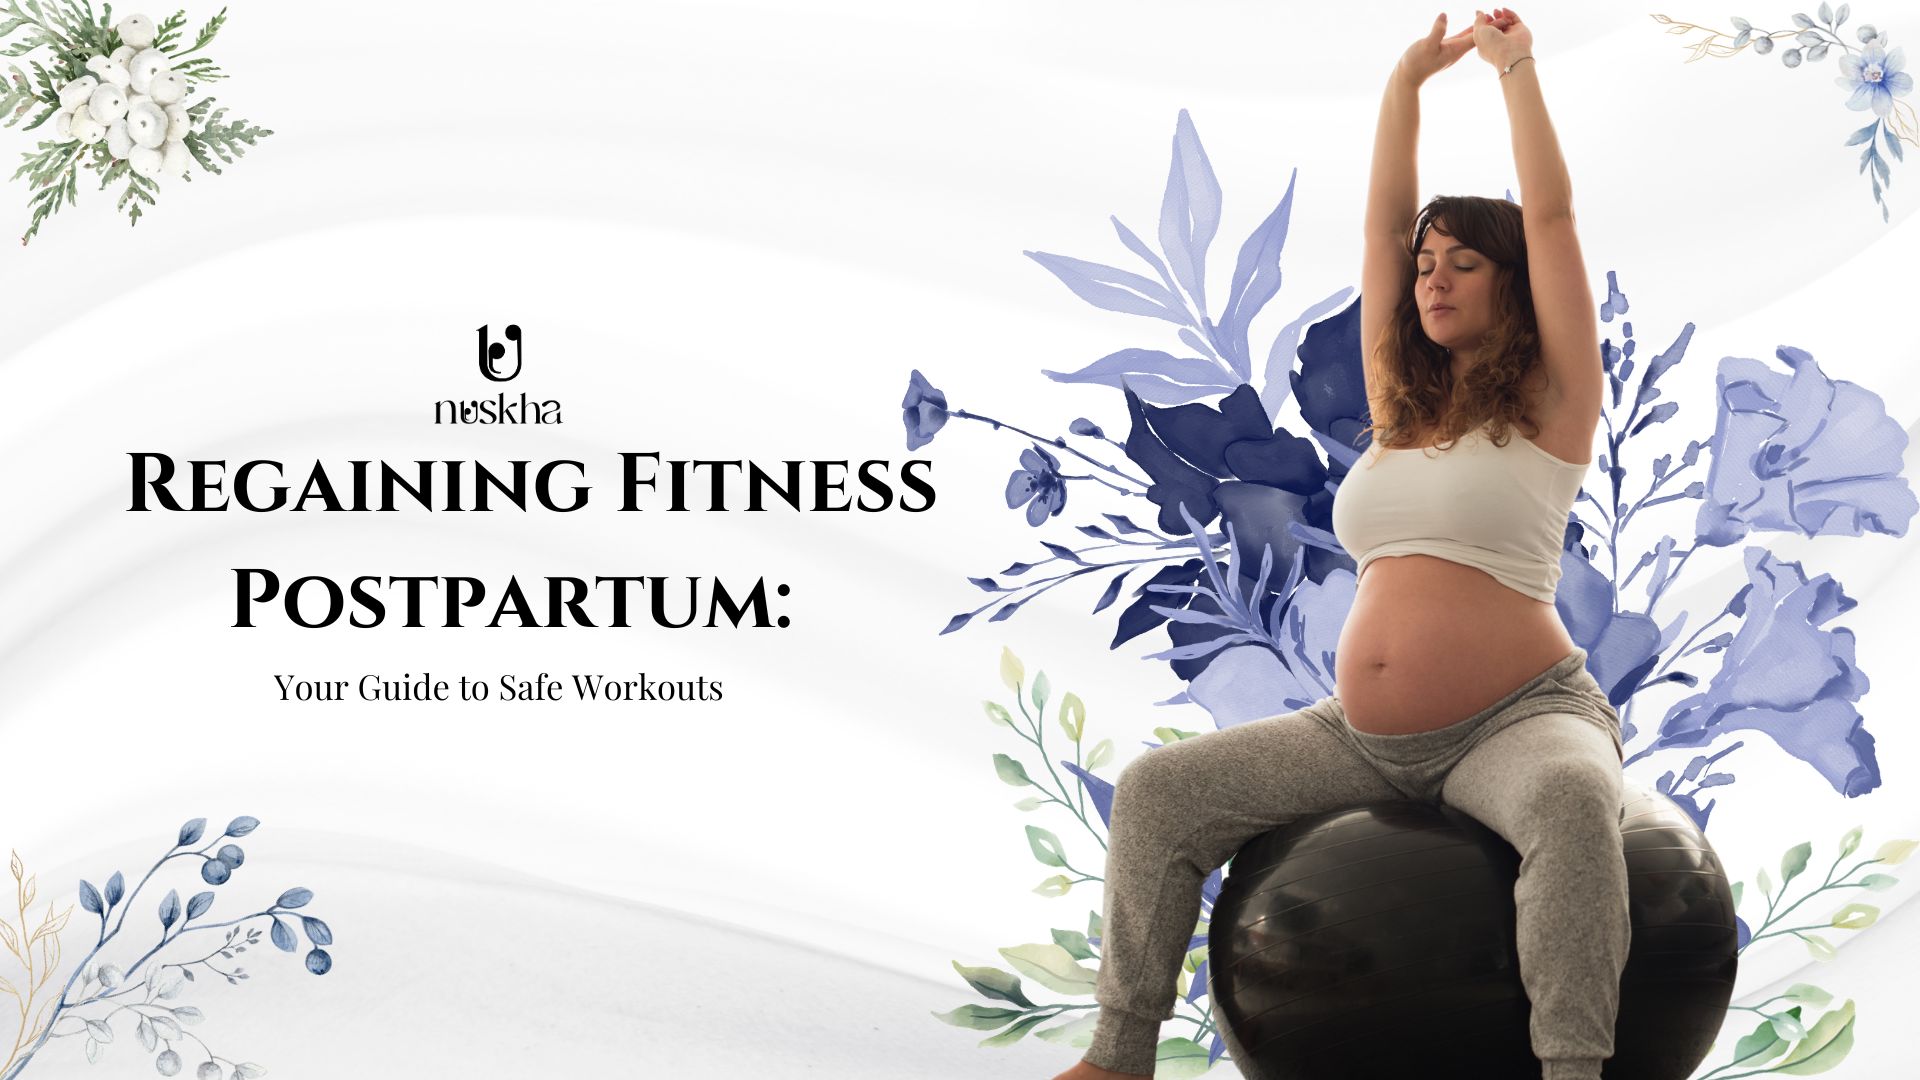 Regaining Fitness Postpartum: Your Guide to Safe Workouts